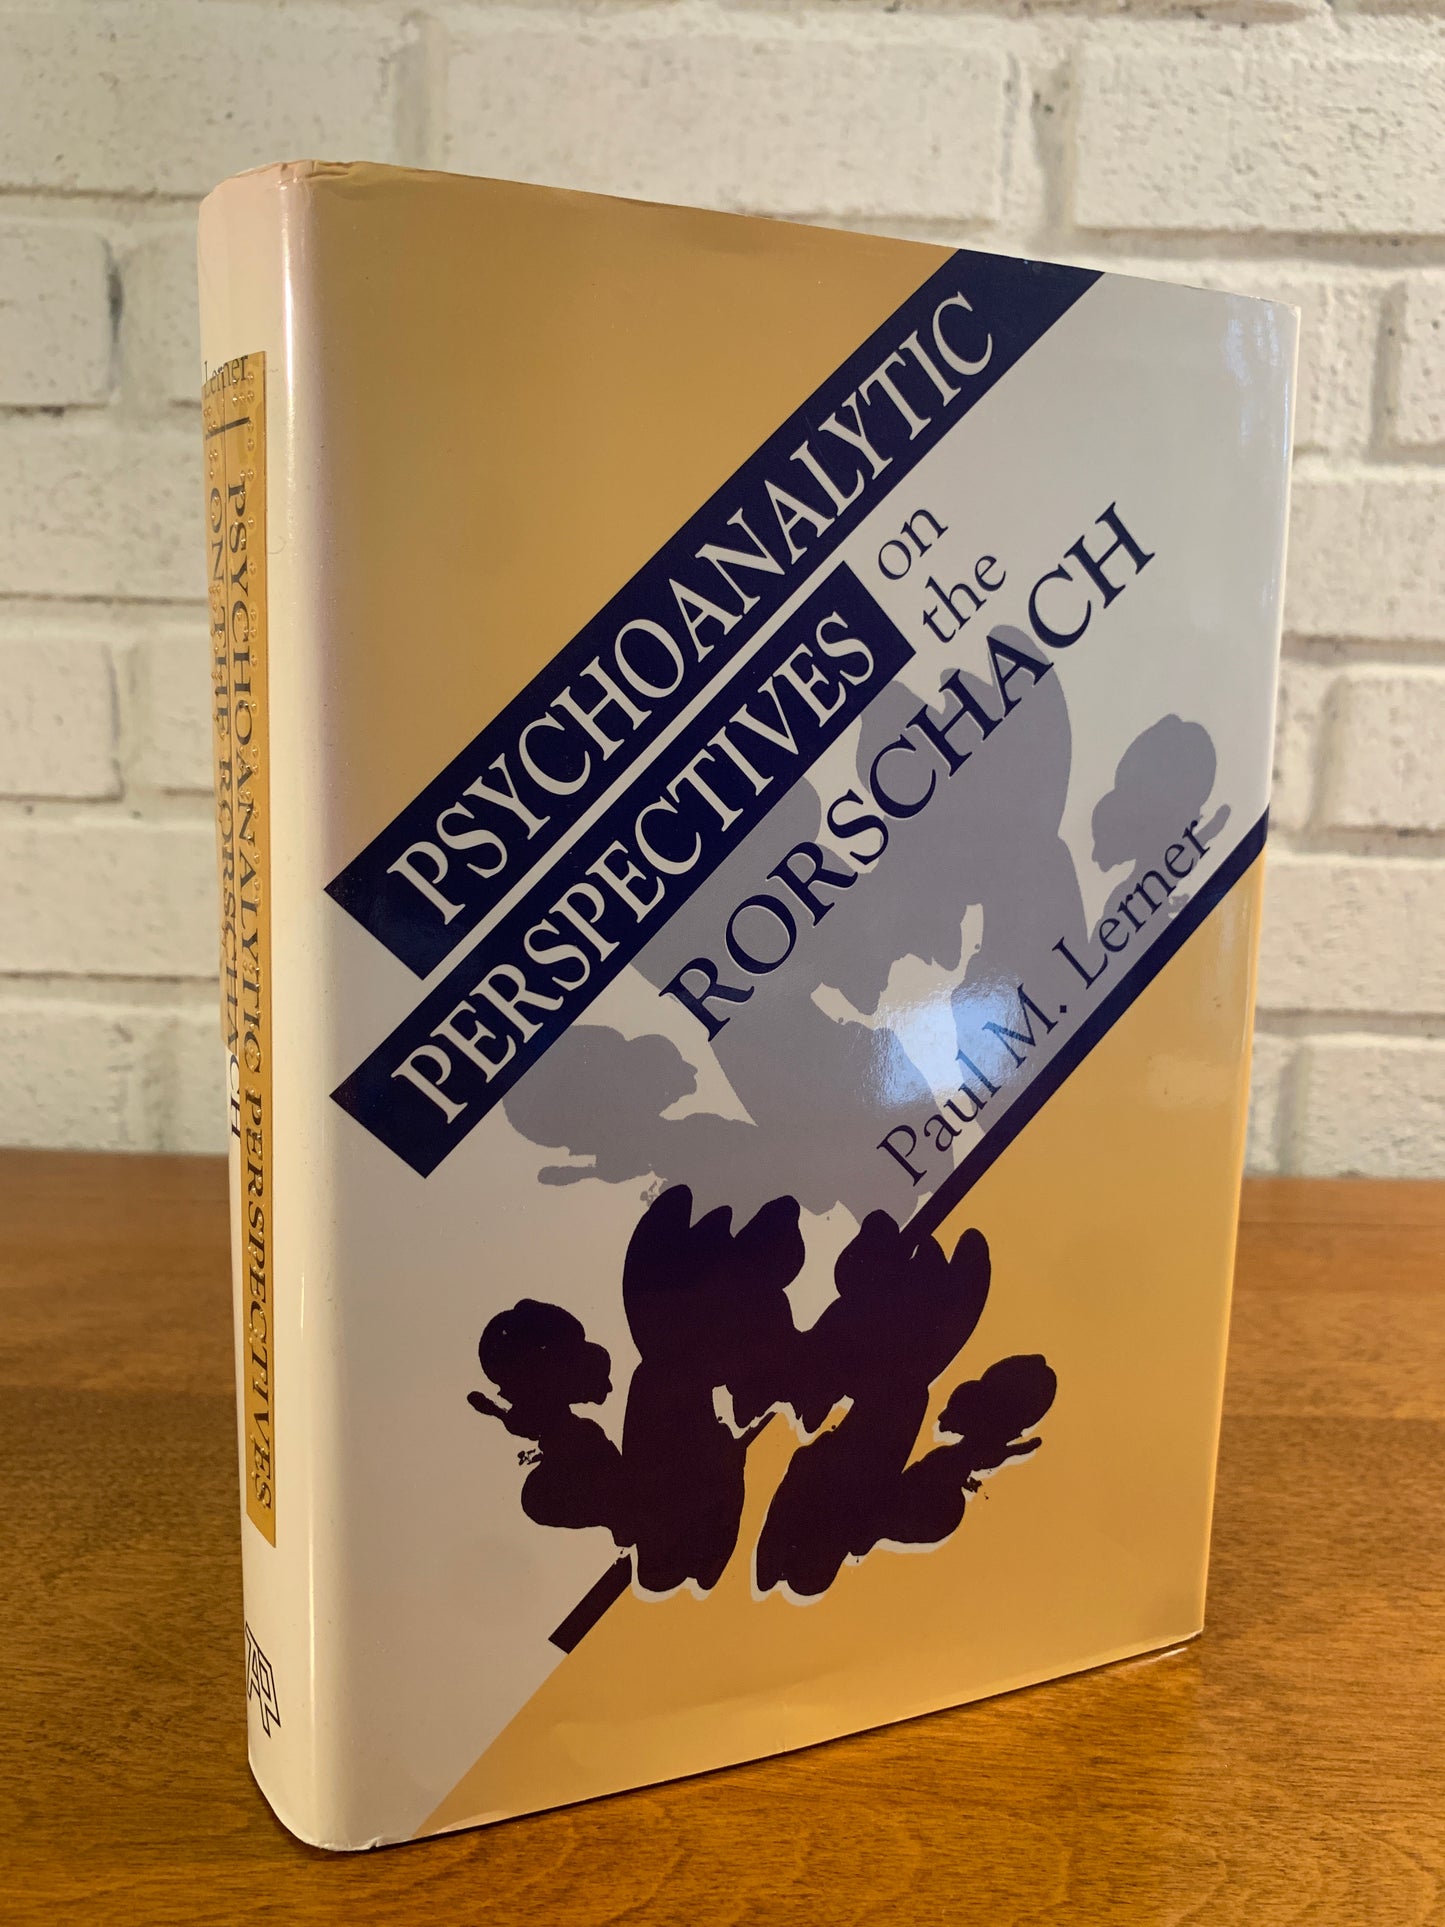 Psychoanalytic Perspectives on the Rorschach by Paul M. Lerner